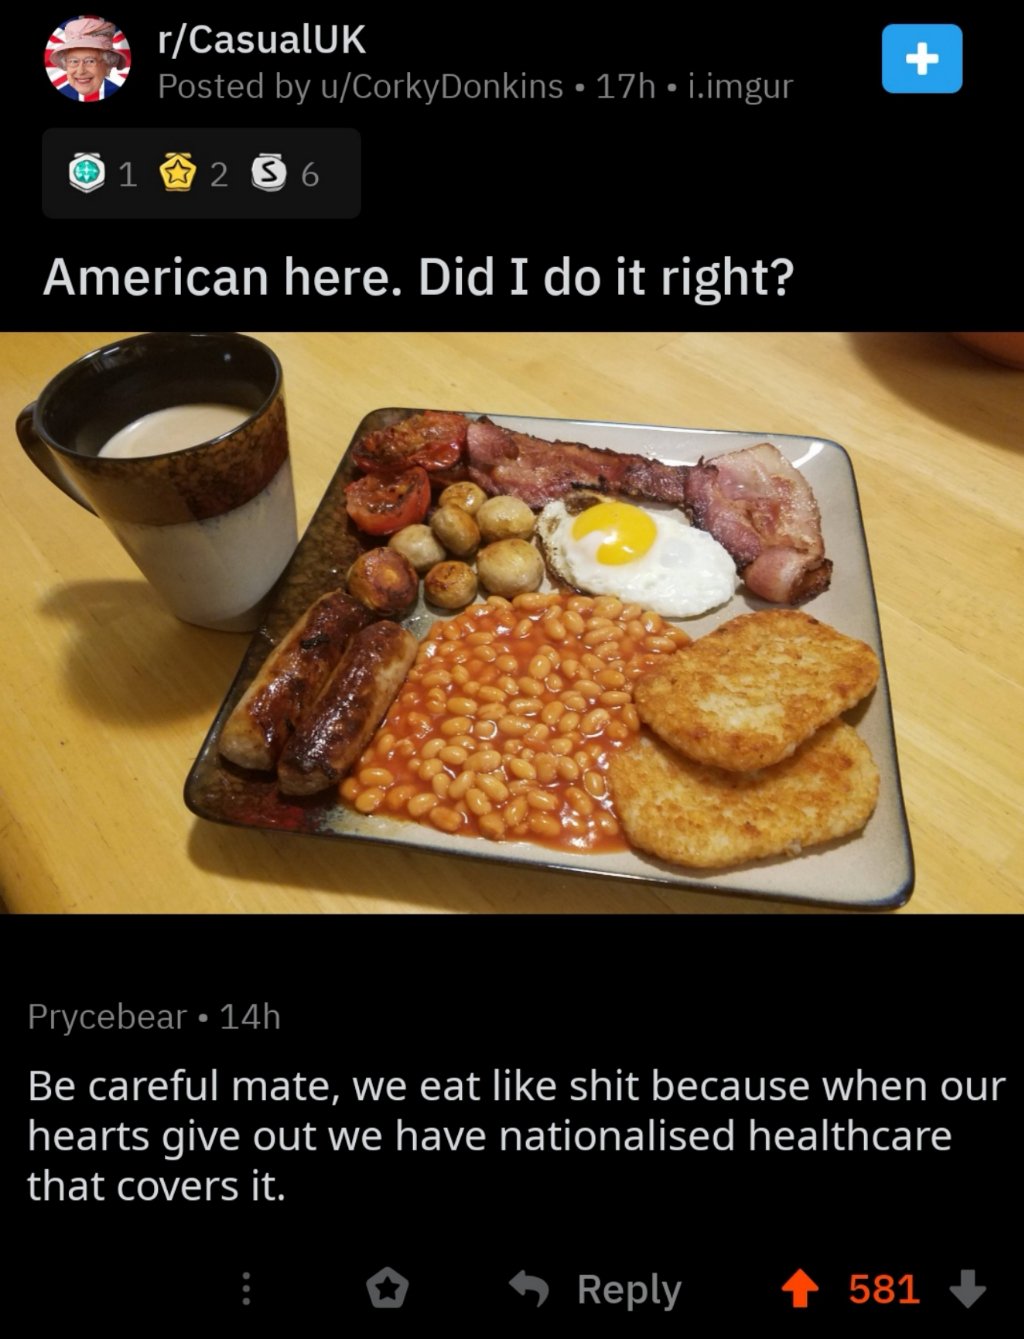 American here. Did I do it right? Be careful mate, we eat shit because when our hearts give out we have nationalised healthcare that covers it